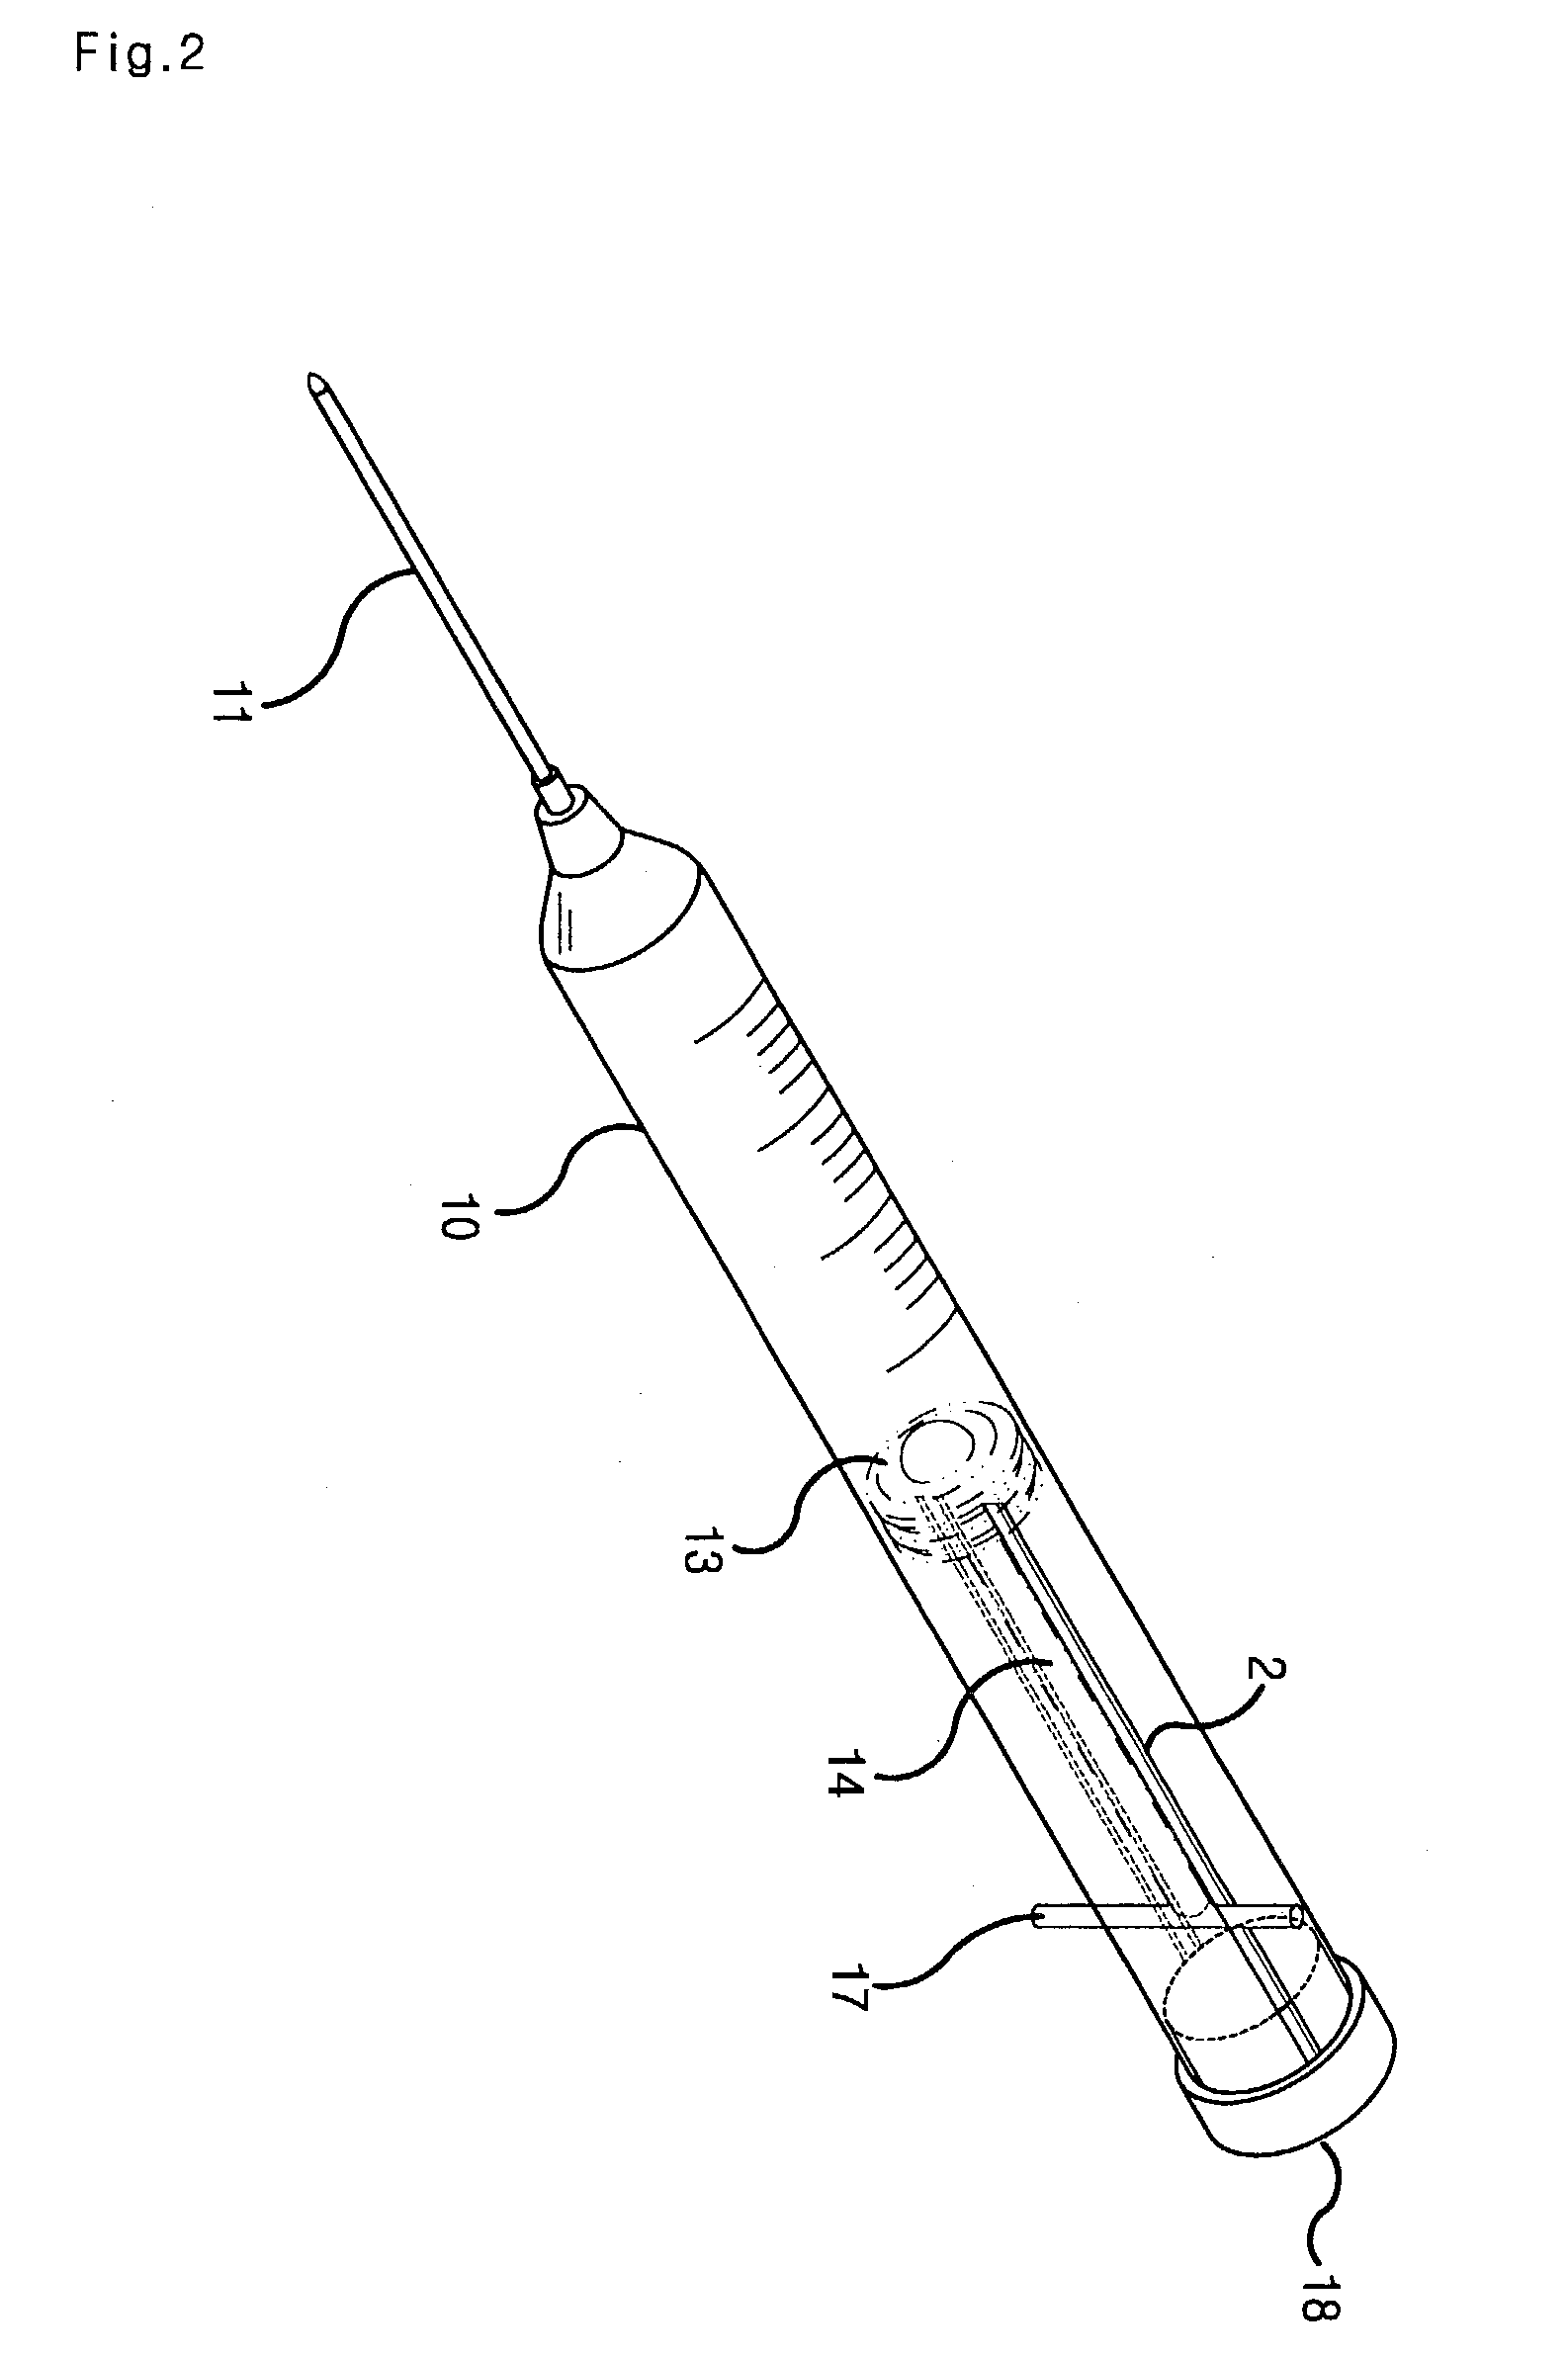 Syringe for collecting blood